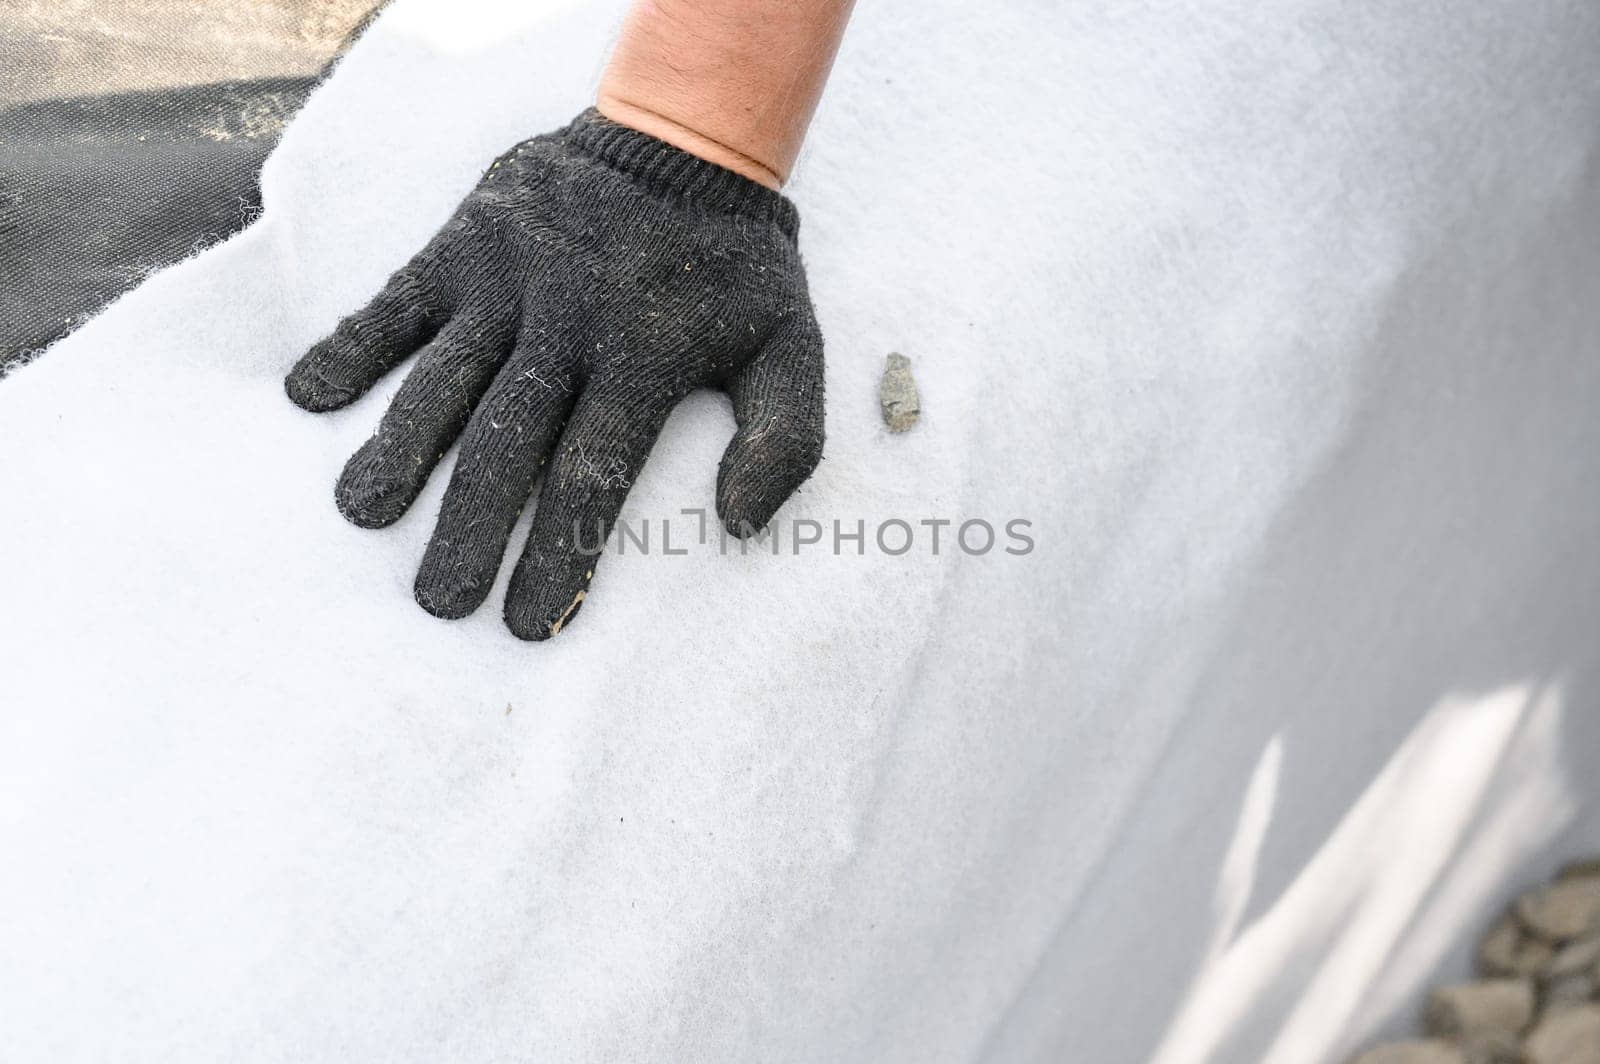 The craftsman spreads white geotextile in the trench. A mans hand in black gloves on a white canvas.